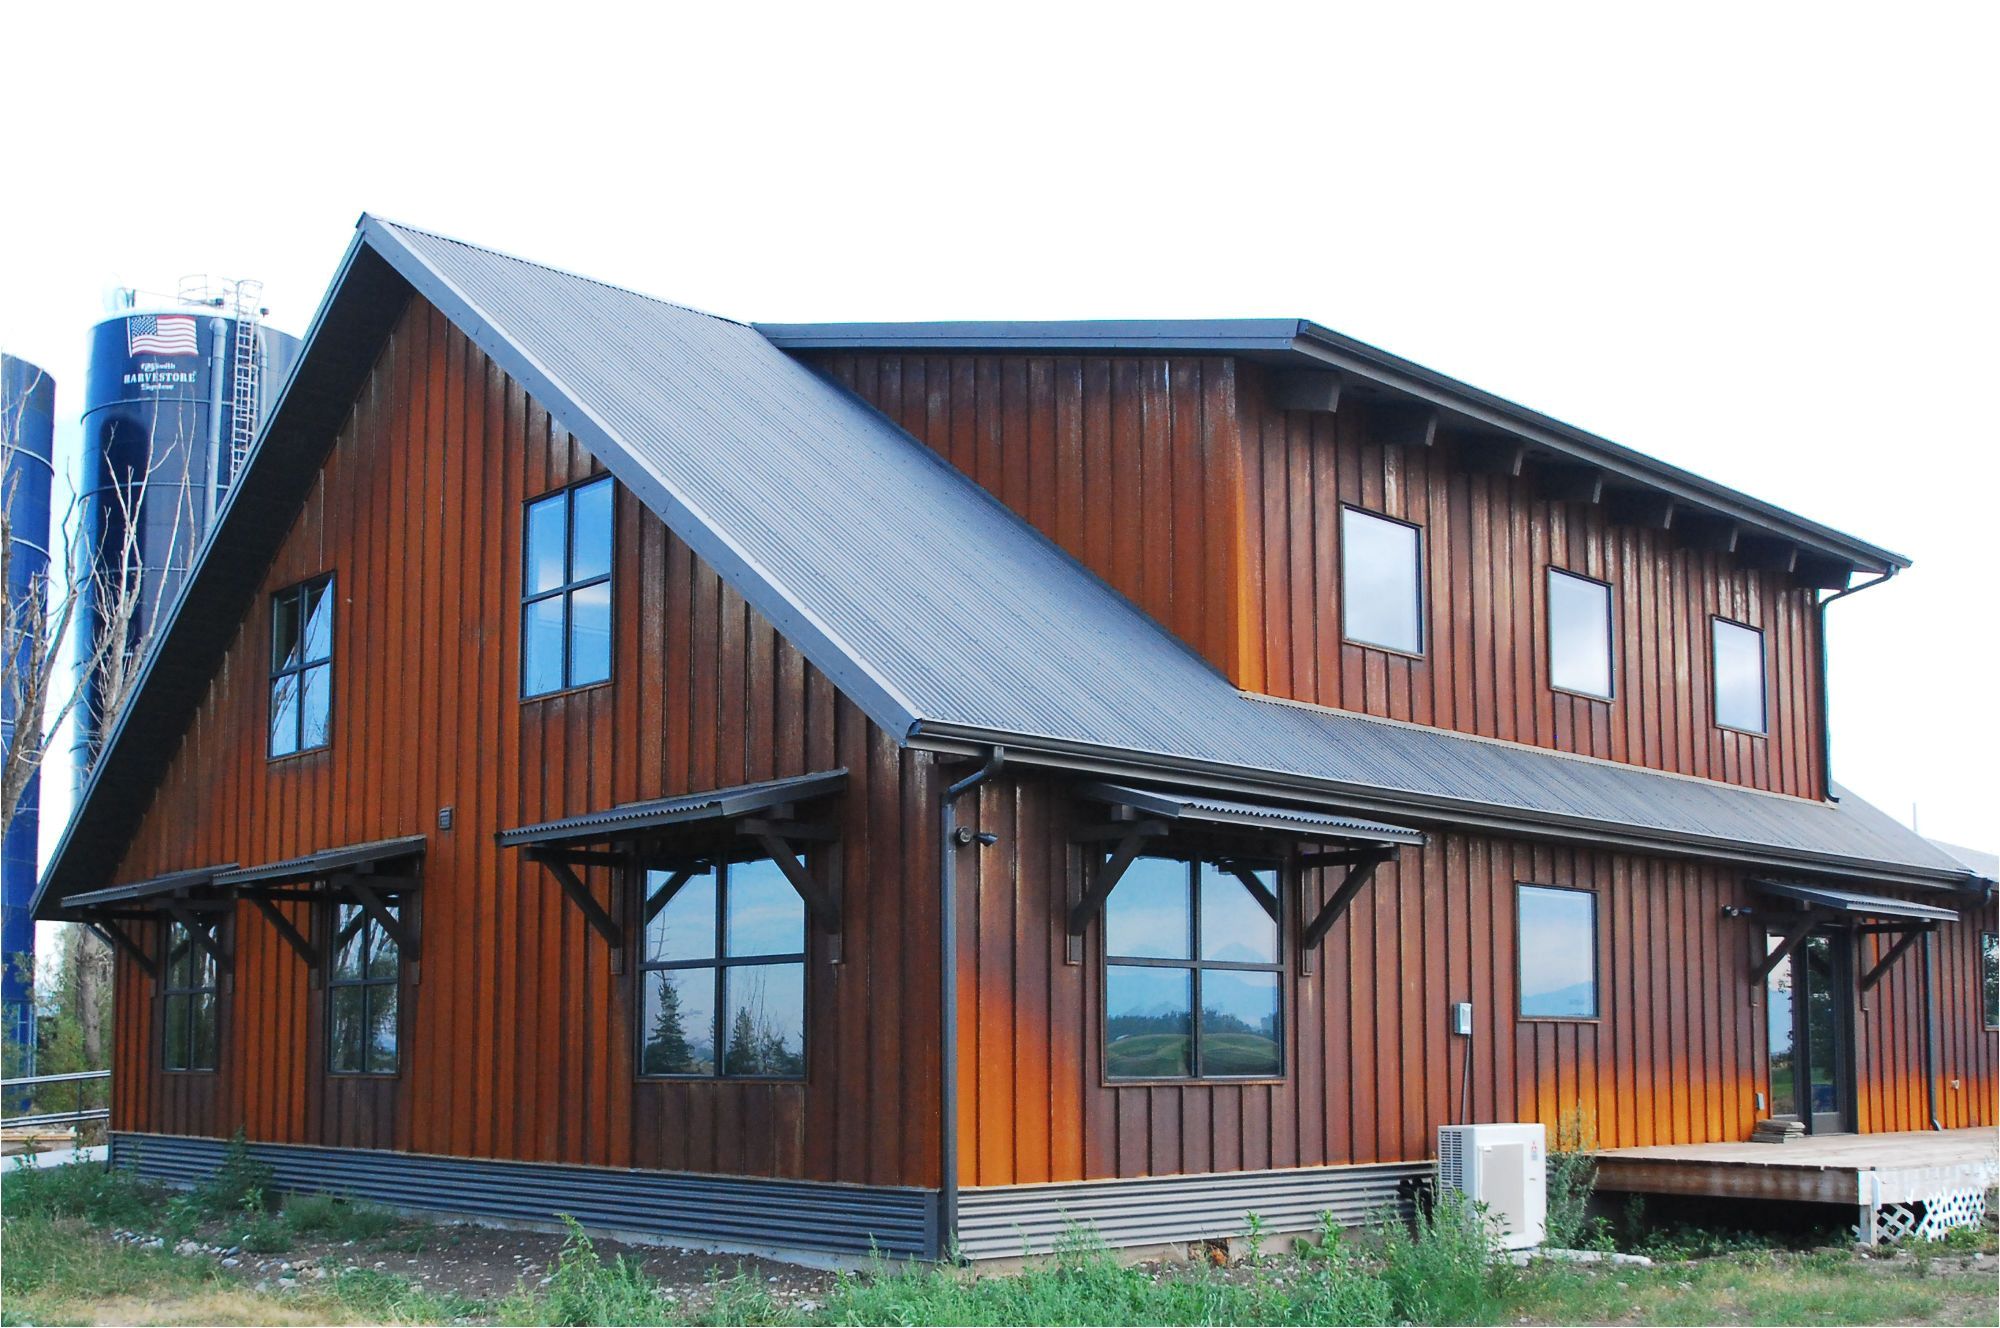 bridger steel exterior metal siding in small doses this could be cool